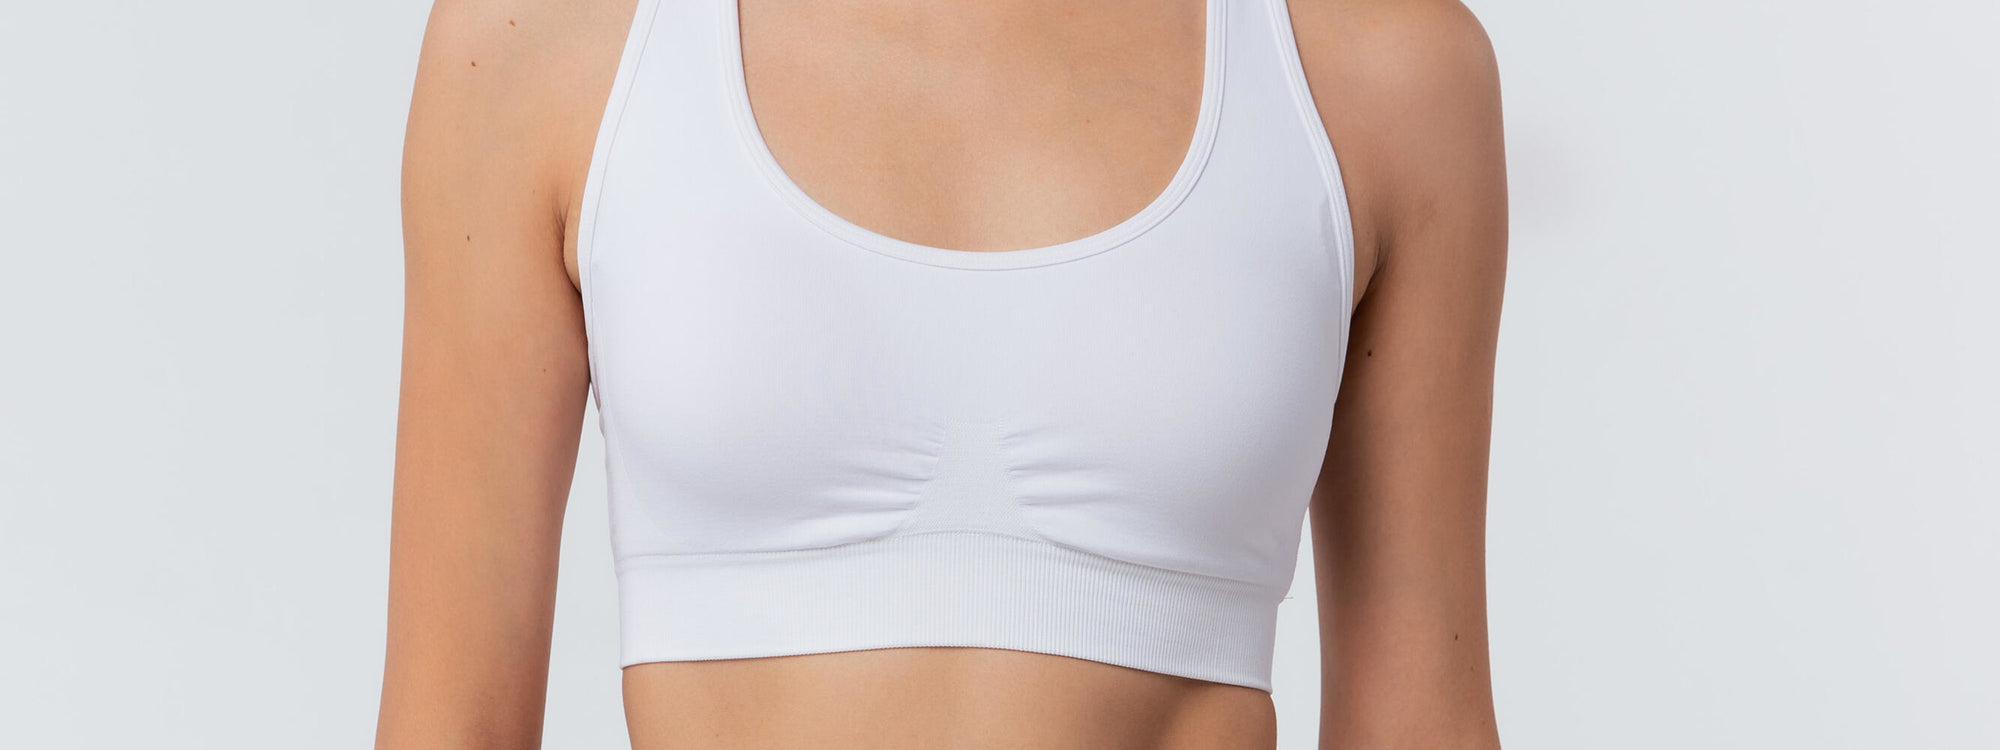 How To Find Your Perfect Sports Bra